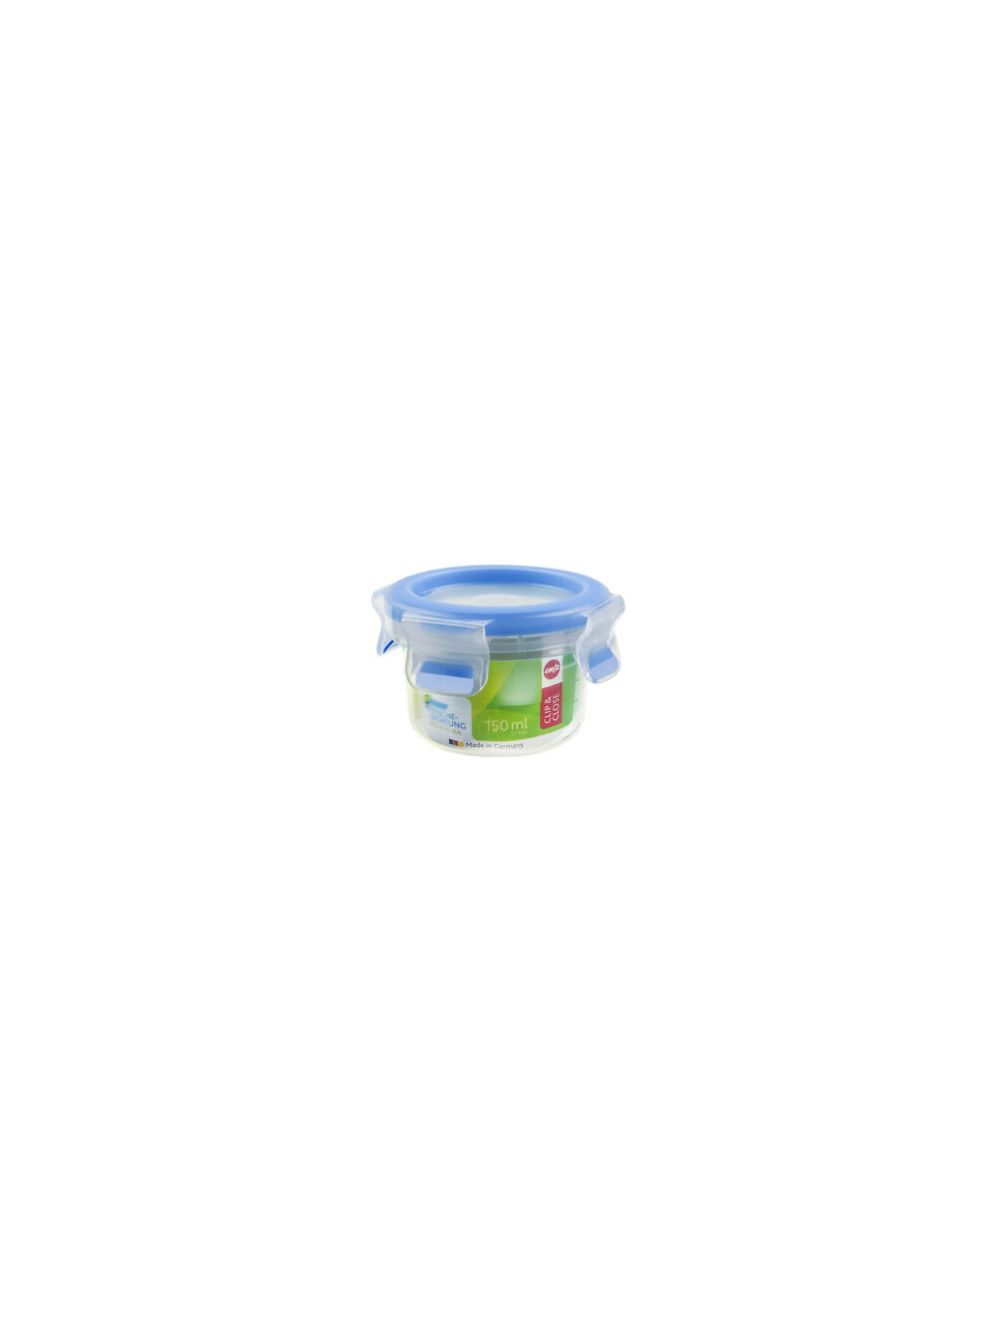 Clip & Close Round Food Storage Container With Lid - Transparent/Blue 0.15L